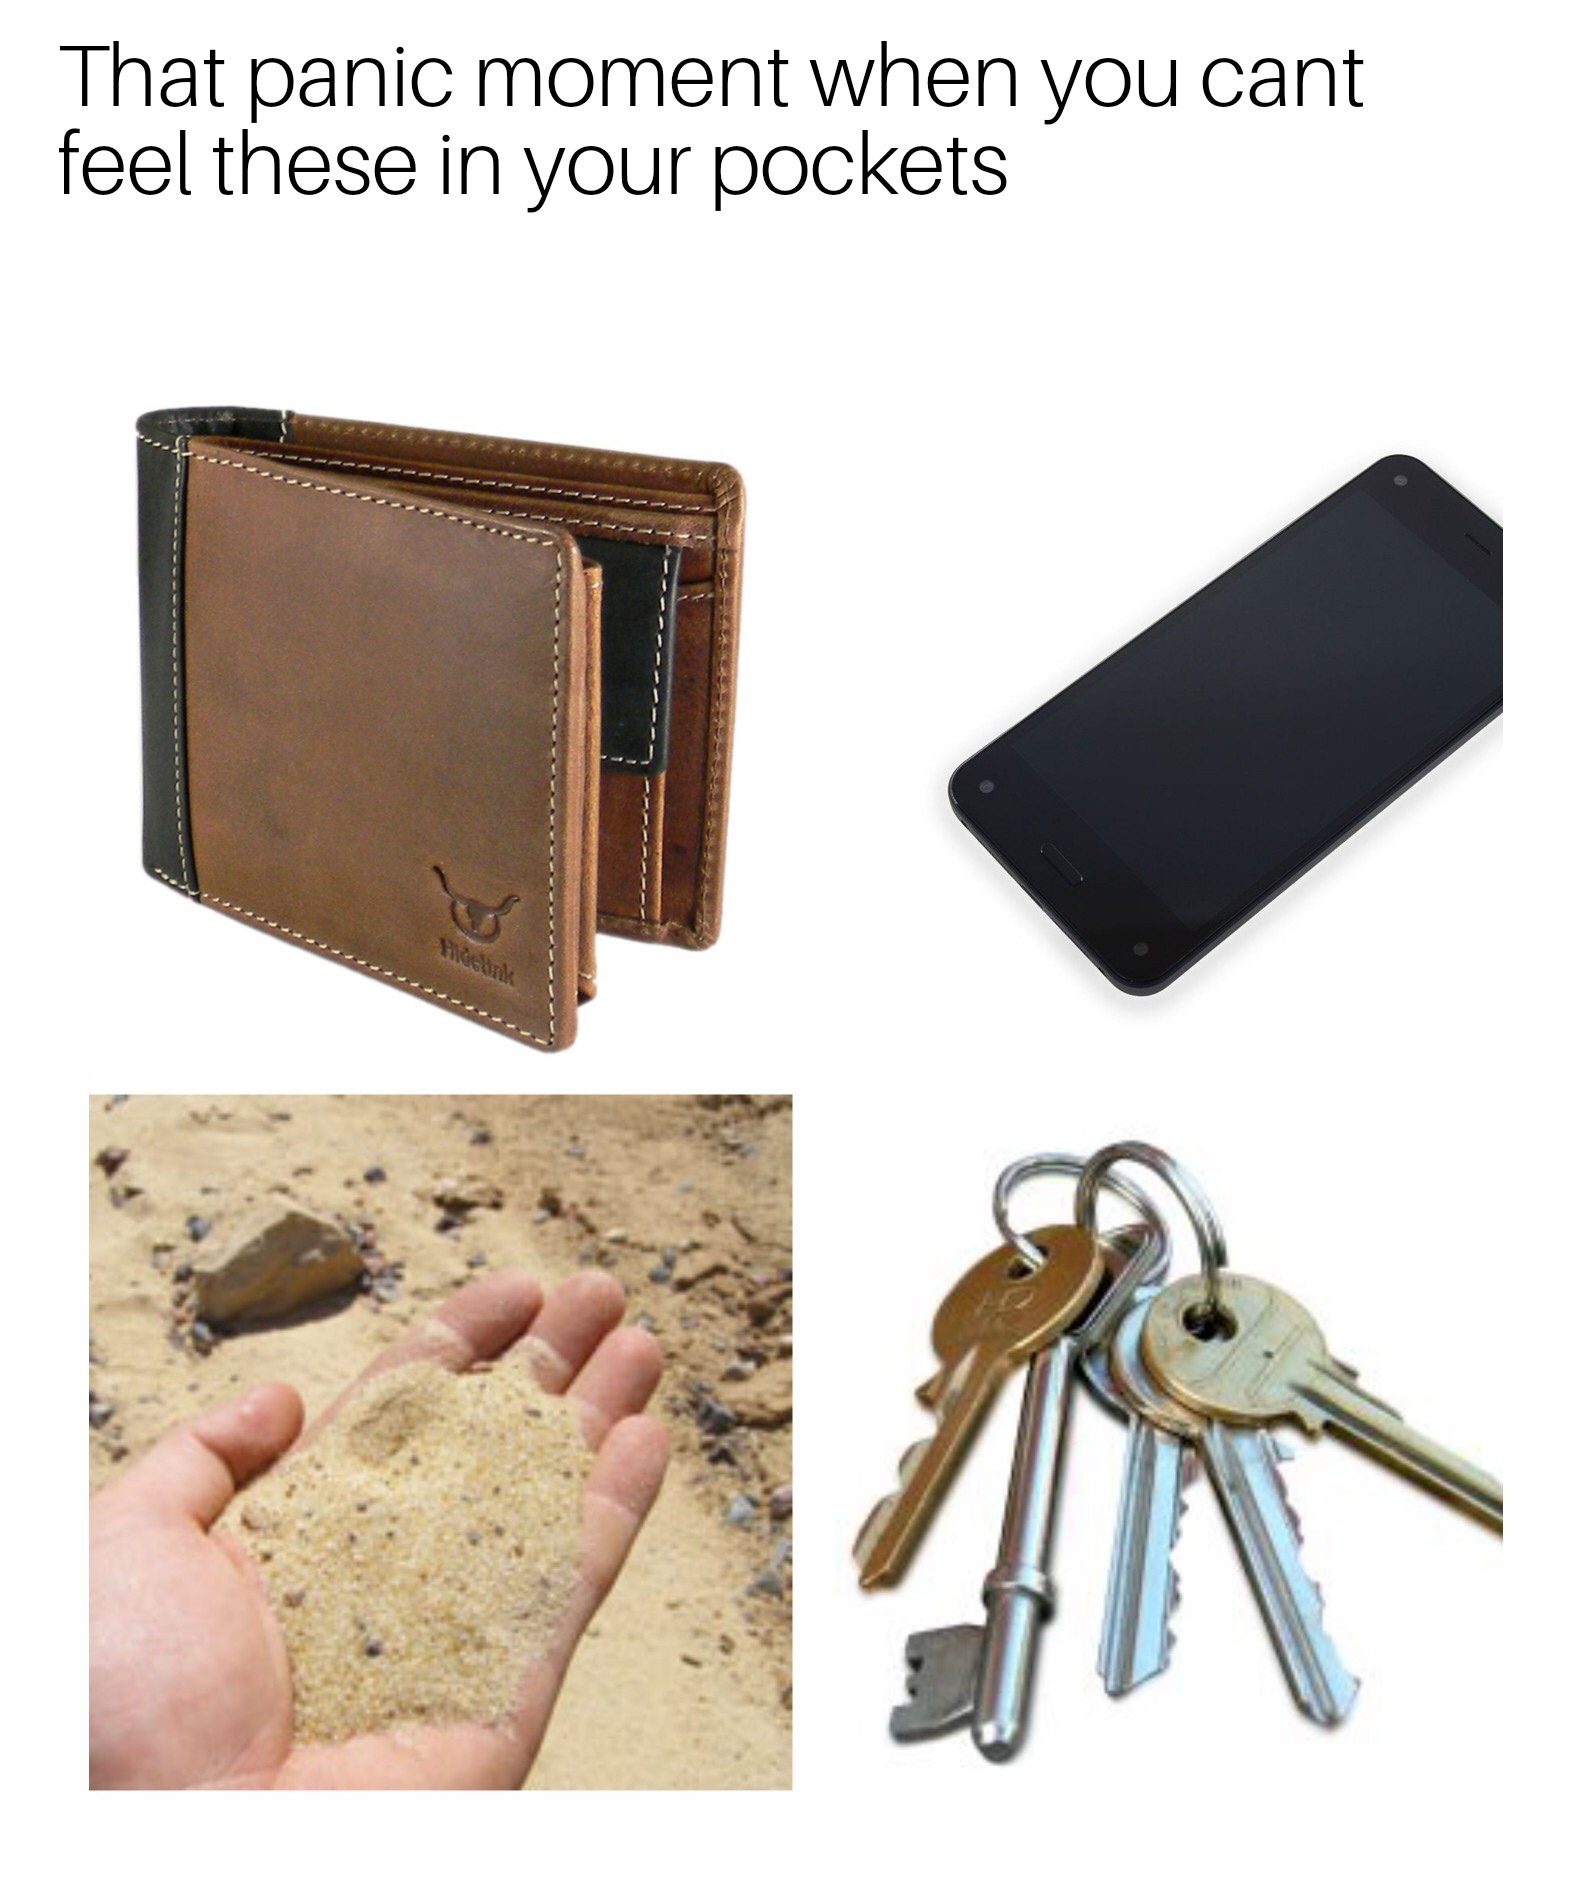 meme wallet - That panic moment when you cant feel these in your pockets